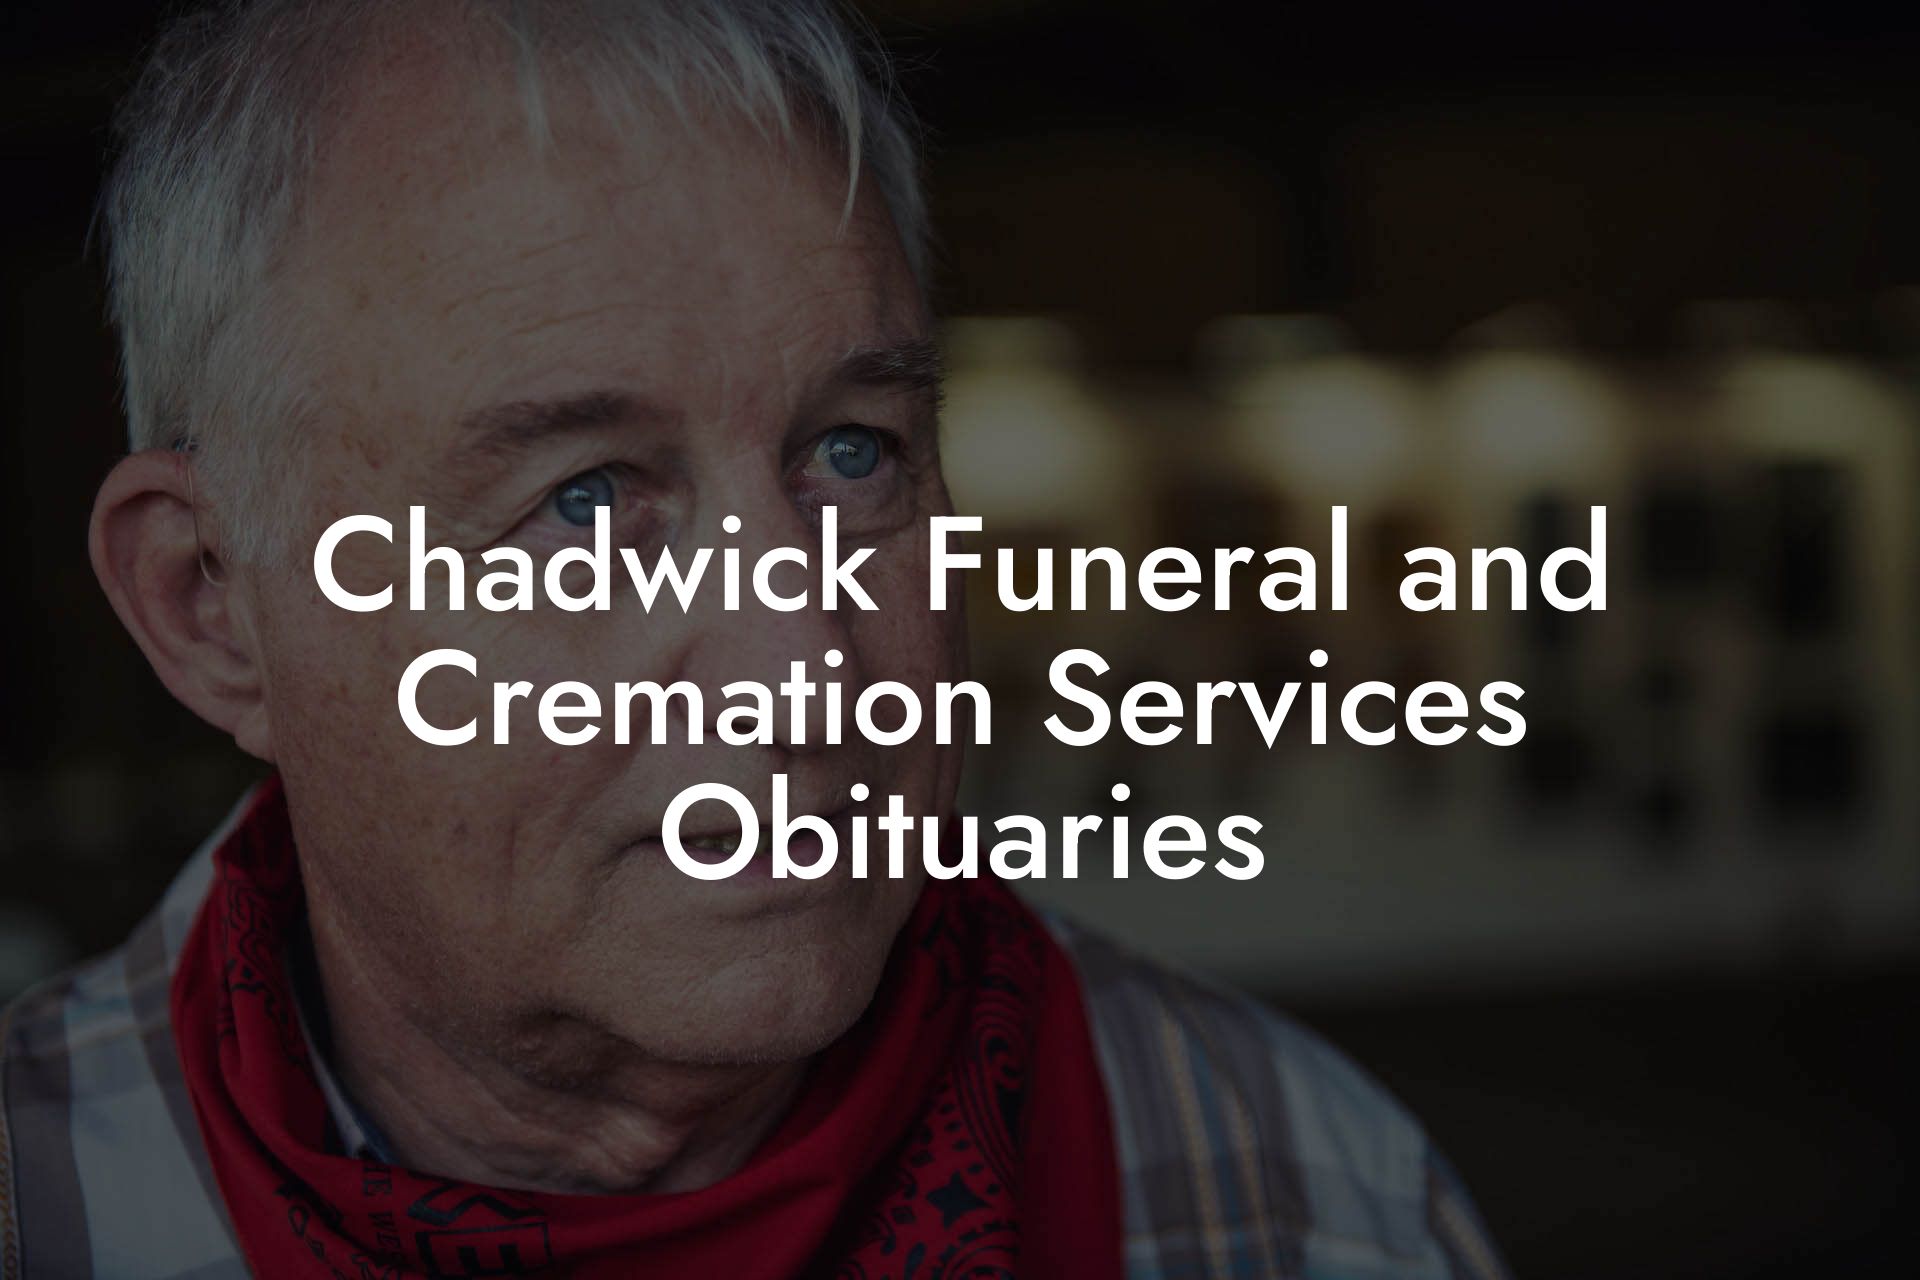 Chadwick Funeral And Cremation Services Obituaries Eulogy Assistant